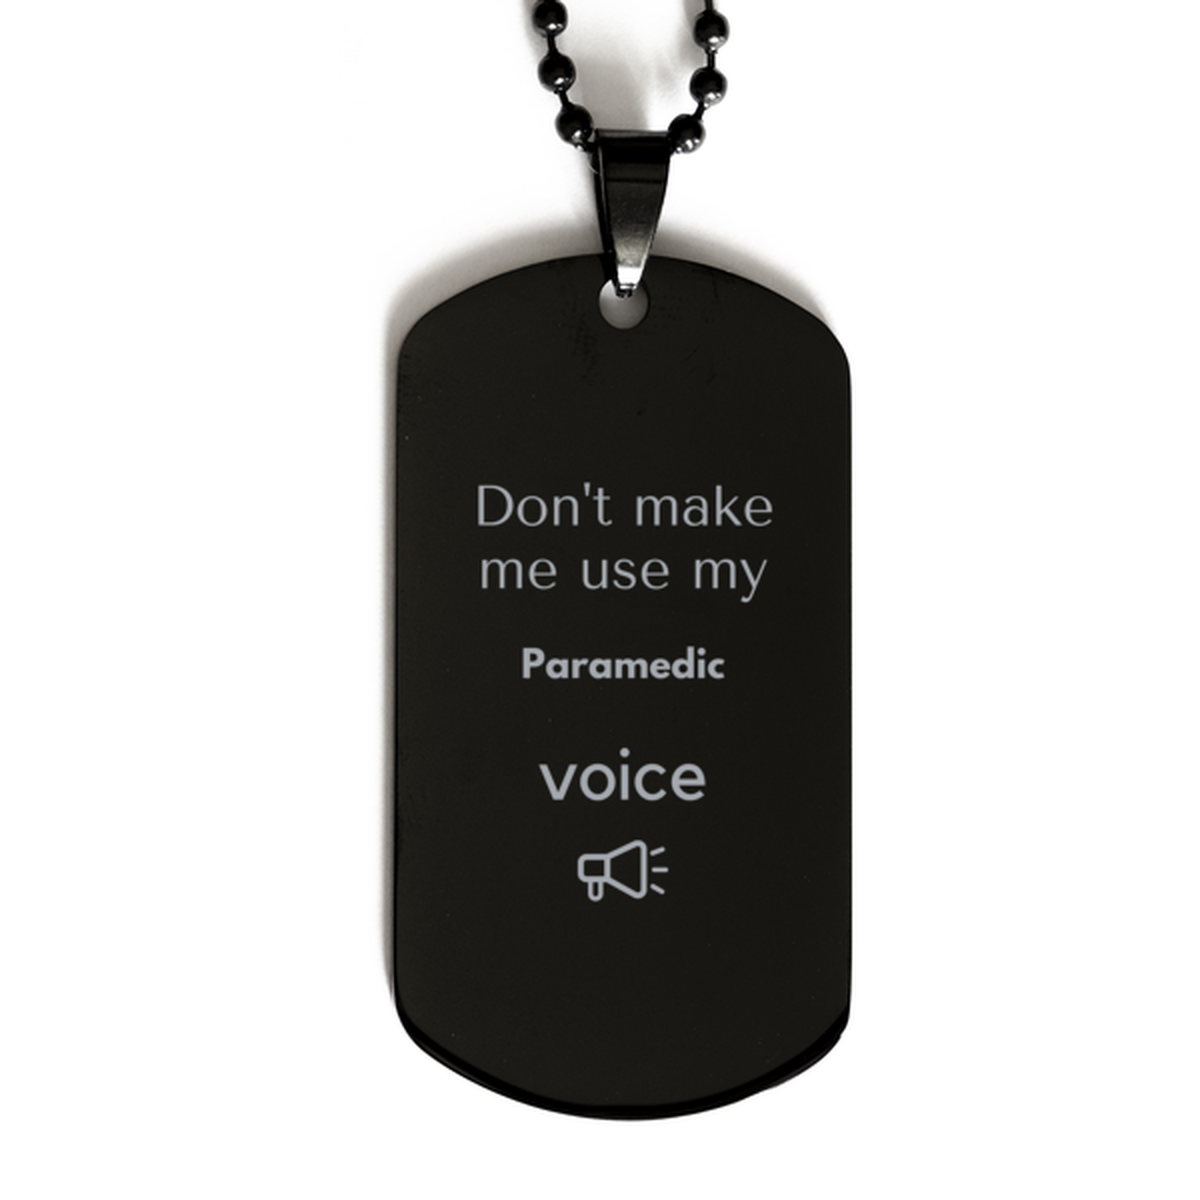 Don't make me use my Paramedic voice, Sarcasm Paramedic Gifts, Christmas Paramedic Black Dog Tag Birthday Unique Gifts For Paramedic Coworkers, Men, Women, Colleague, Friends